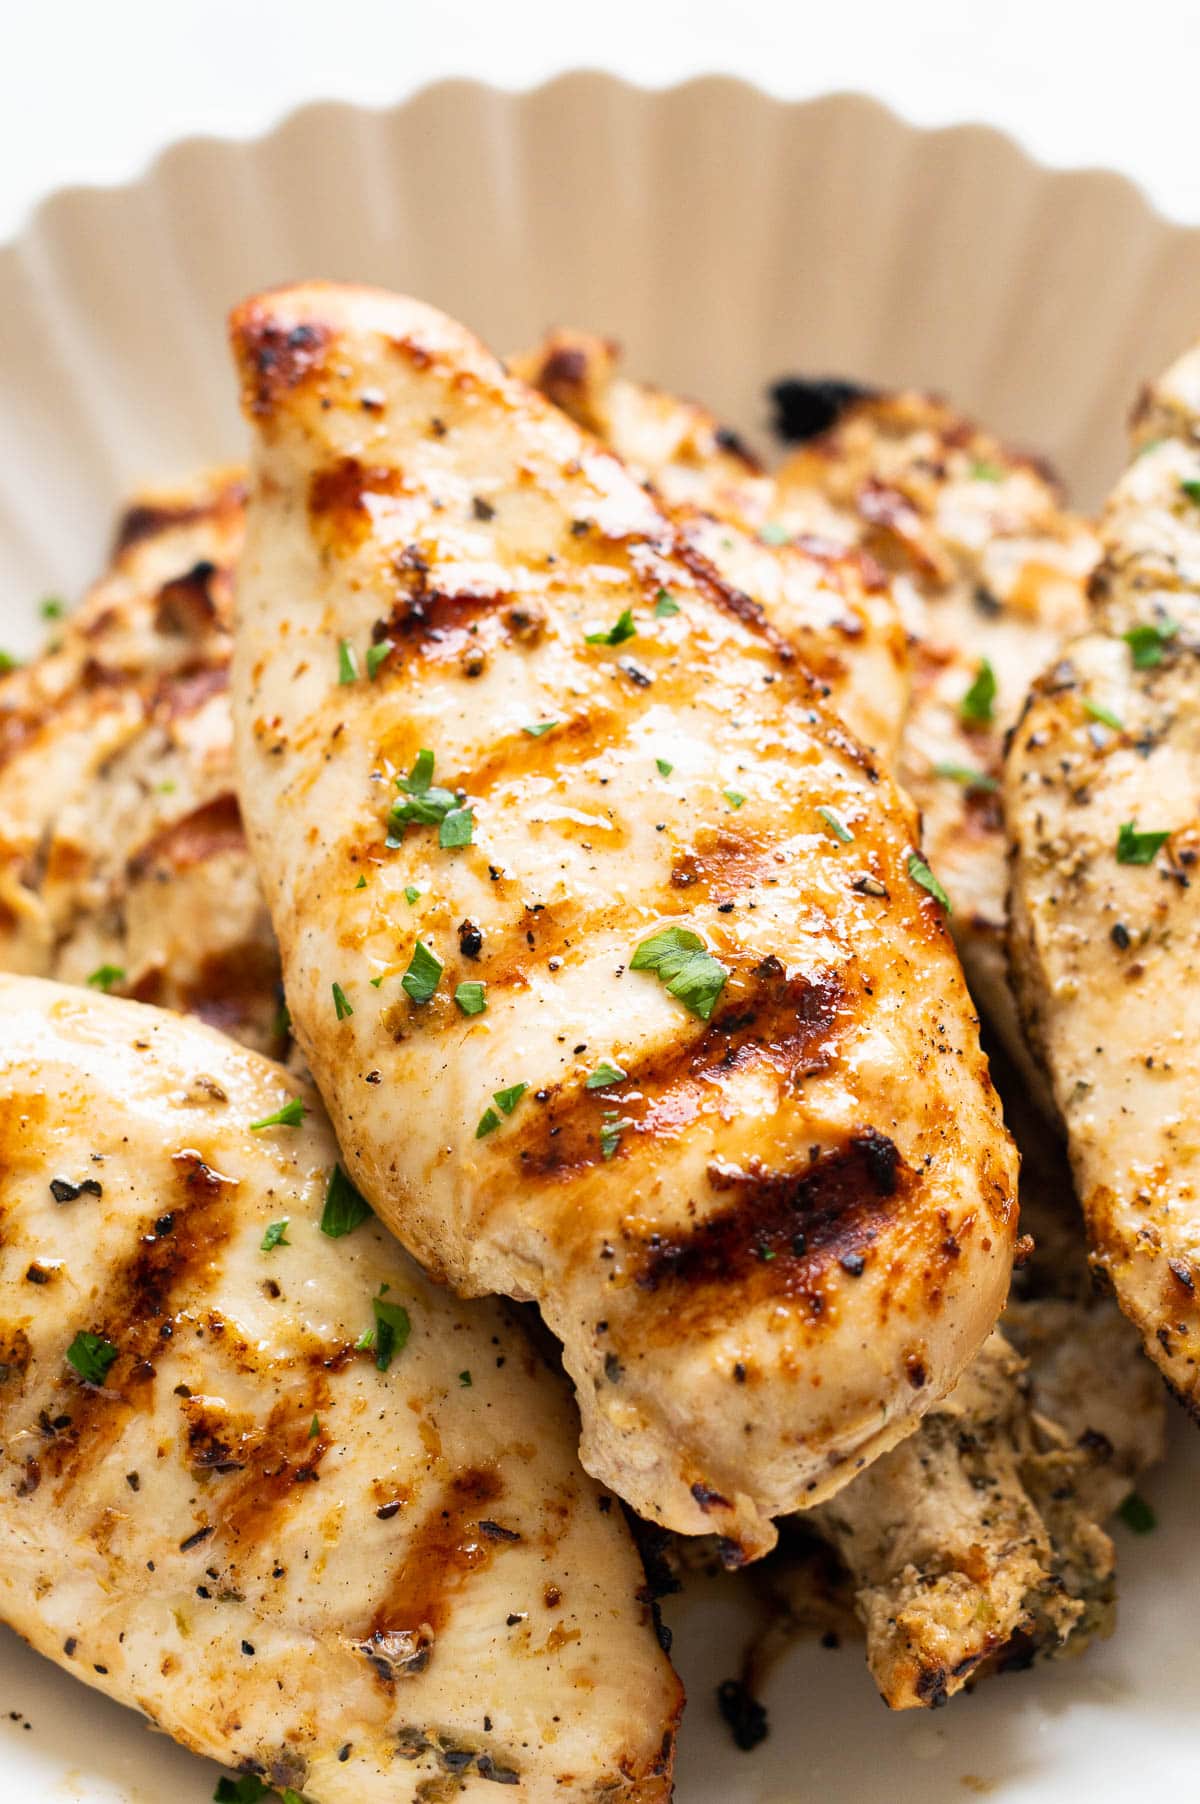 Grilled chicken breasts on a plate garnished with parsley.